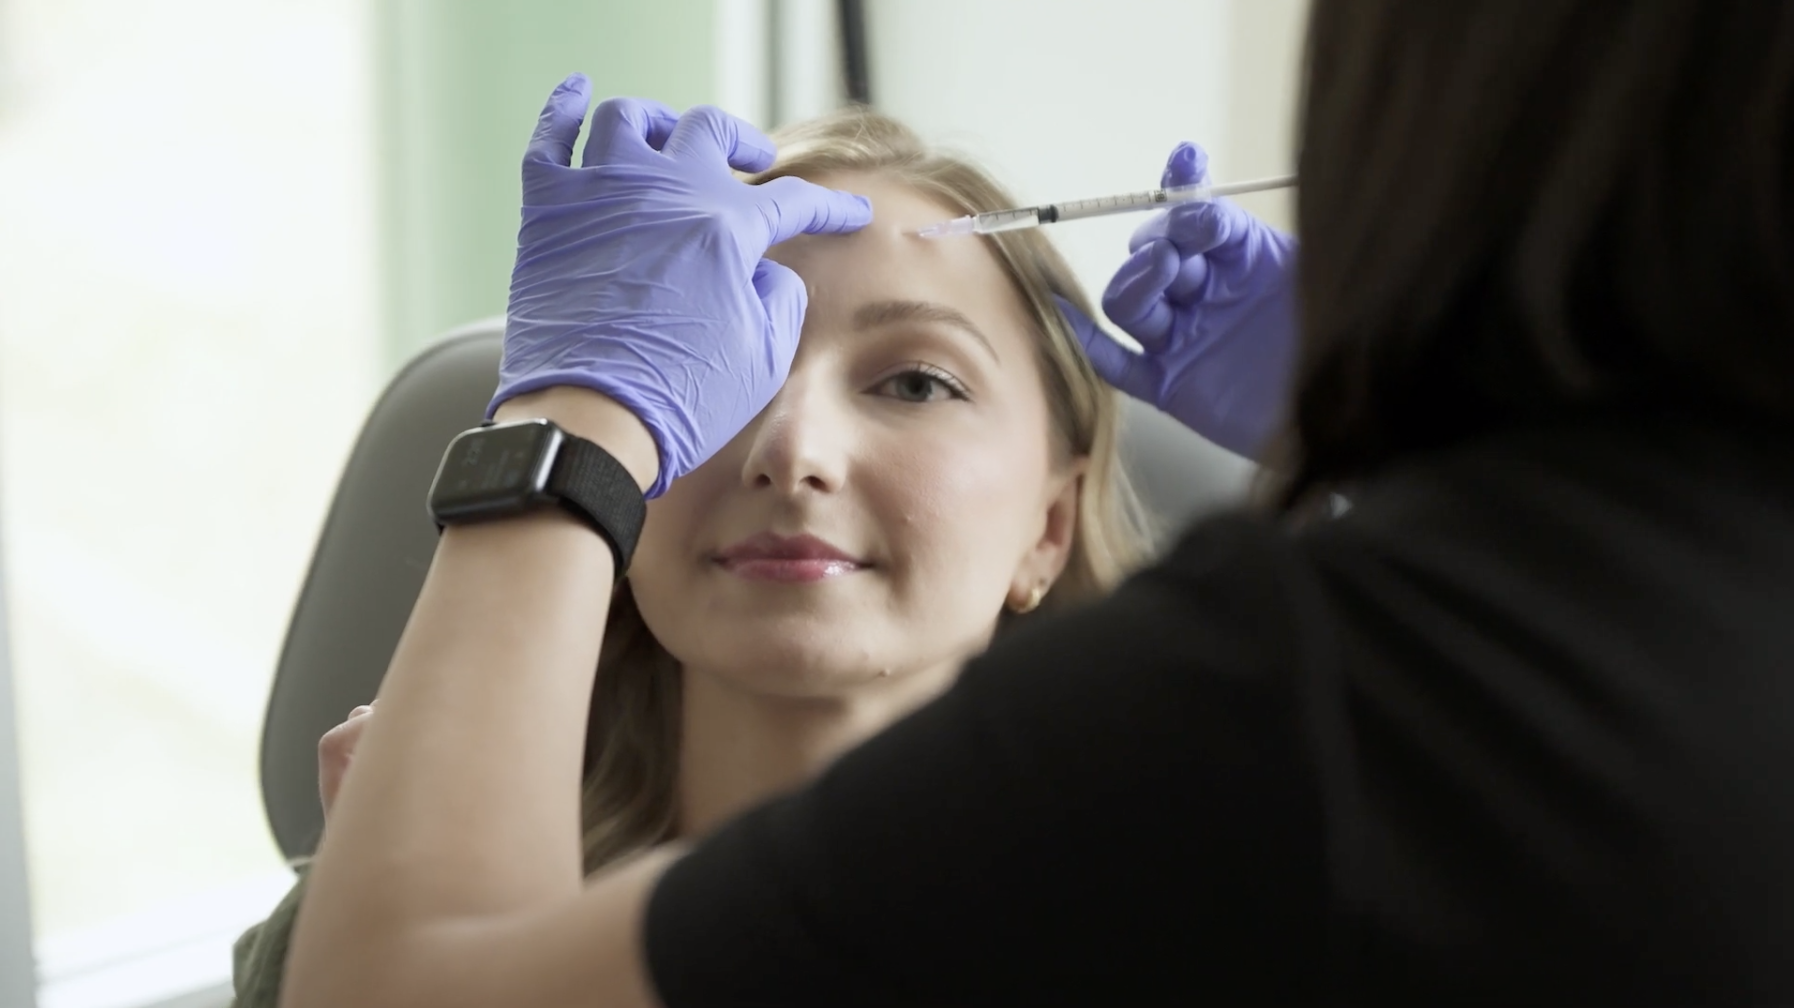 a image of a patient recieving botox injections in her forehead